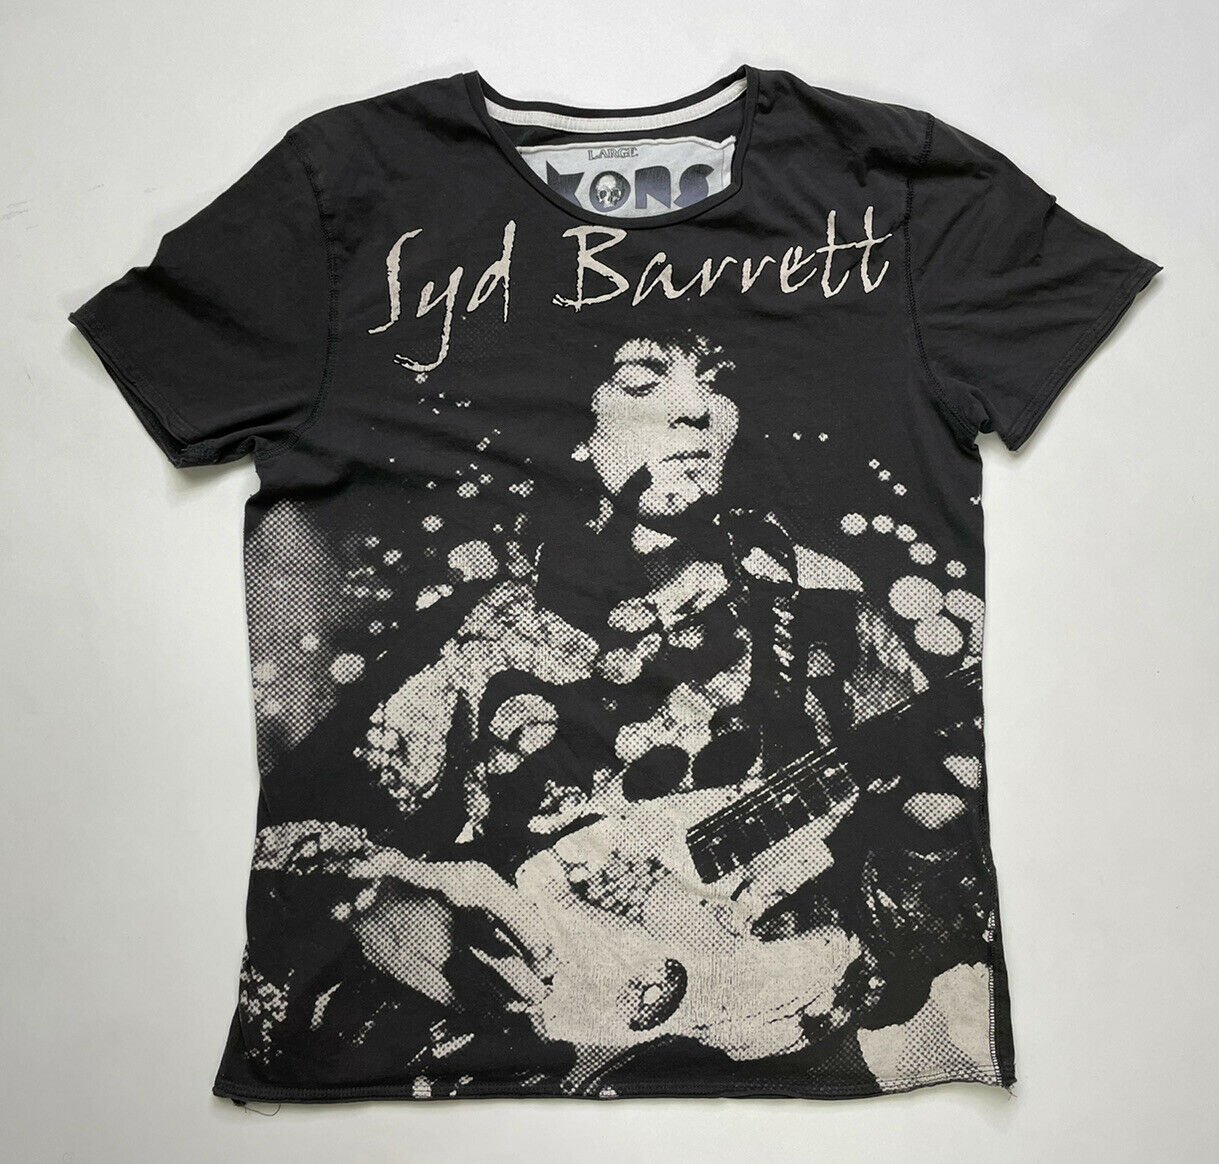 pink floyd/syd barrett with guitar NEW UK S tee